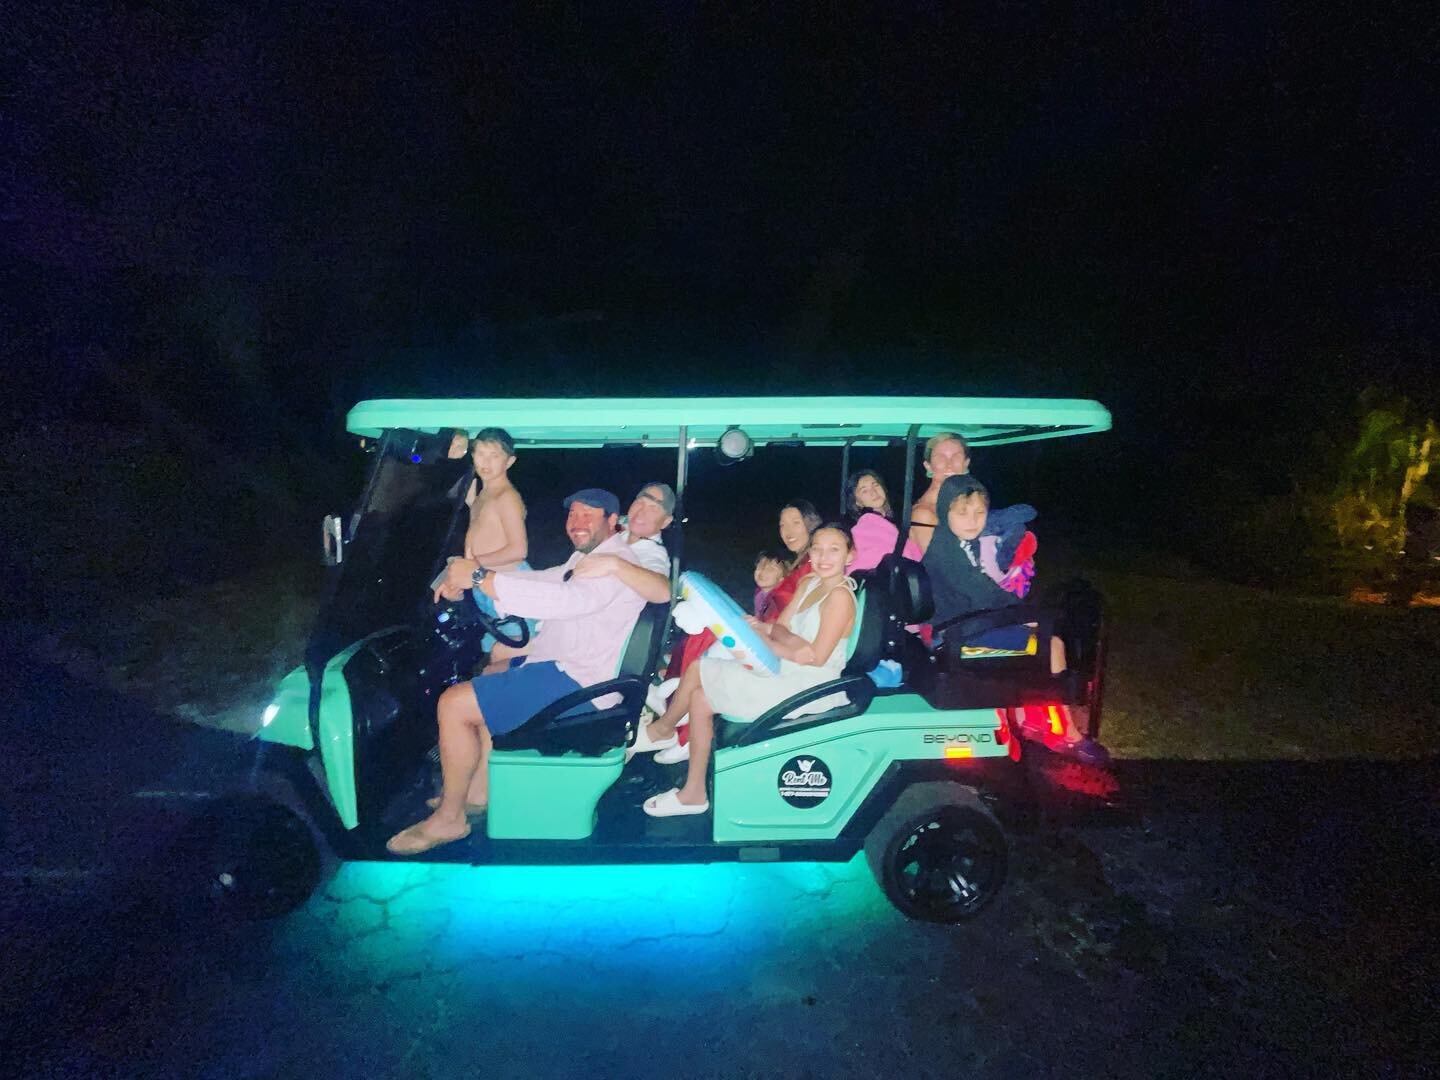 🎊🎉Happy New Year 🎊🎉 We just received our brand new Mint colored cart 💚 DM us to book today! We have a few 4 and 6 seat carts remaining for next week! #goodvibesislandrides #siestakey #siestakeybeach #golfcartrentals